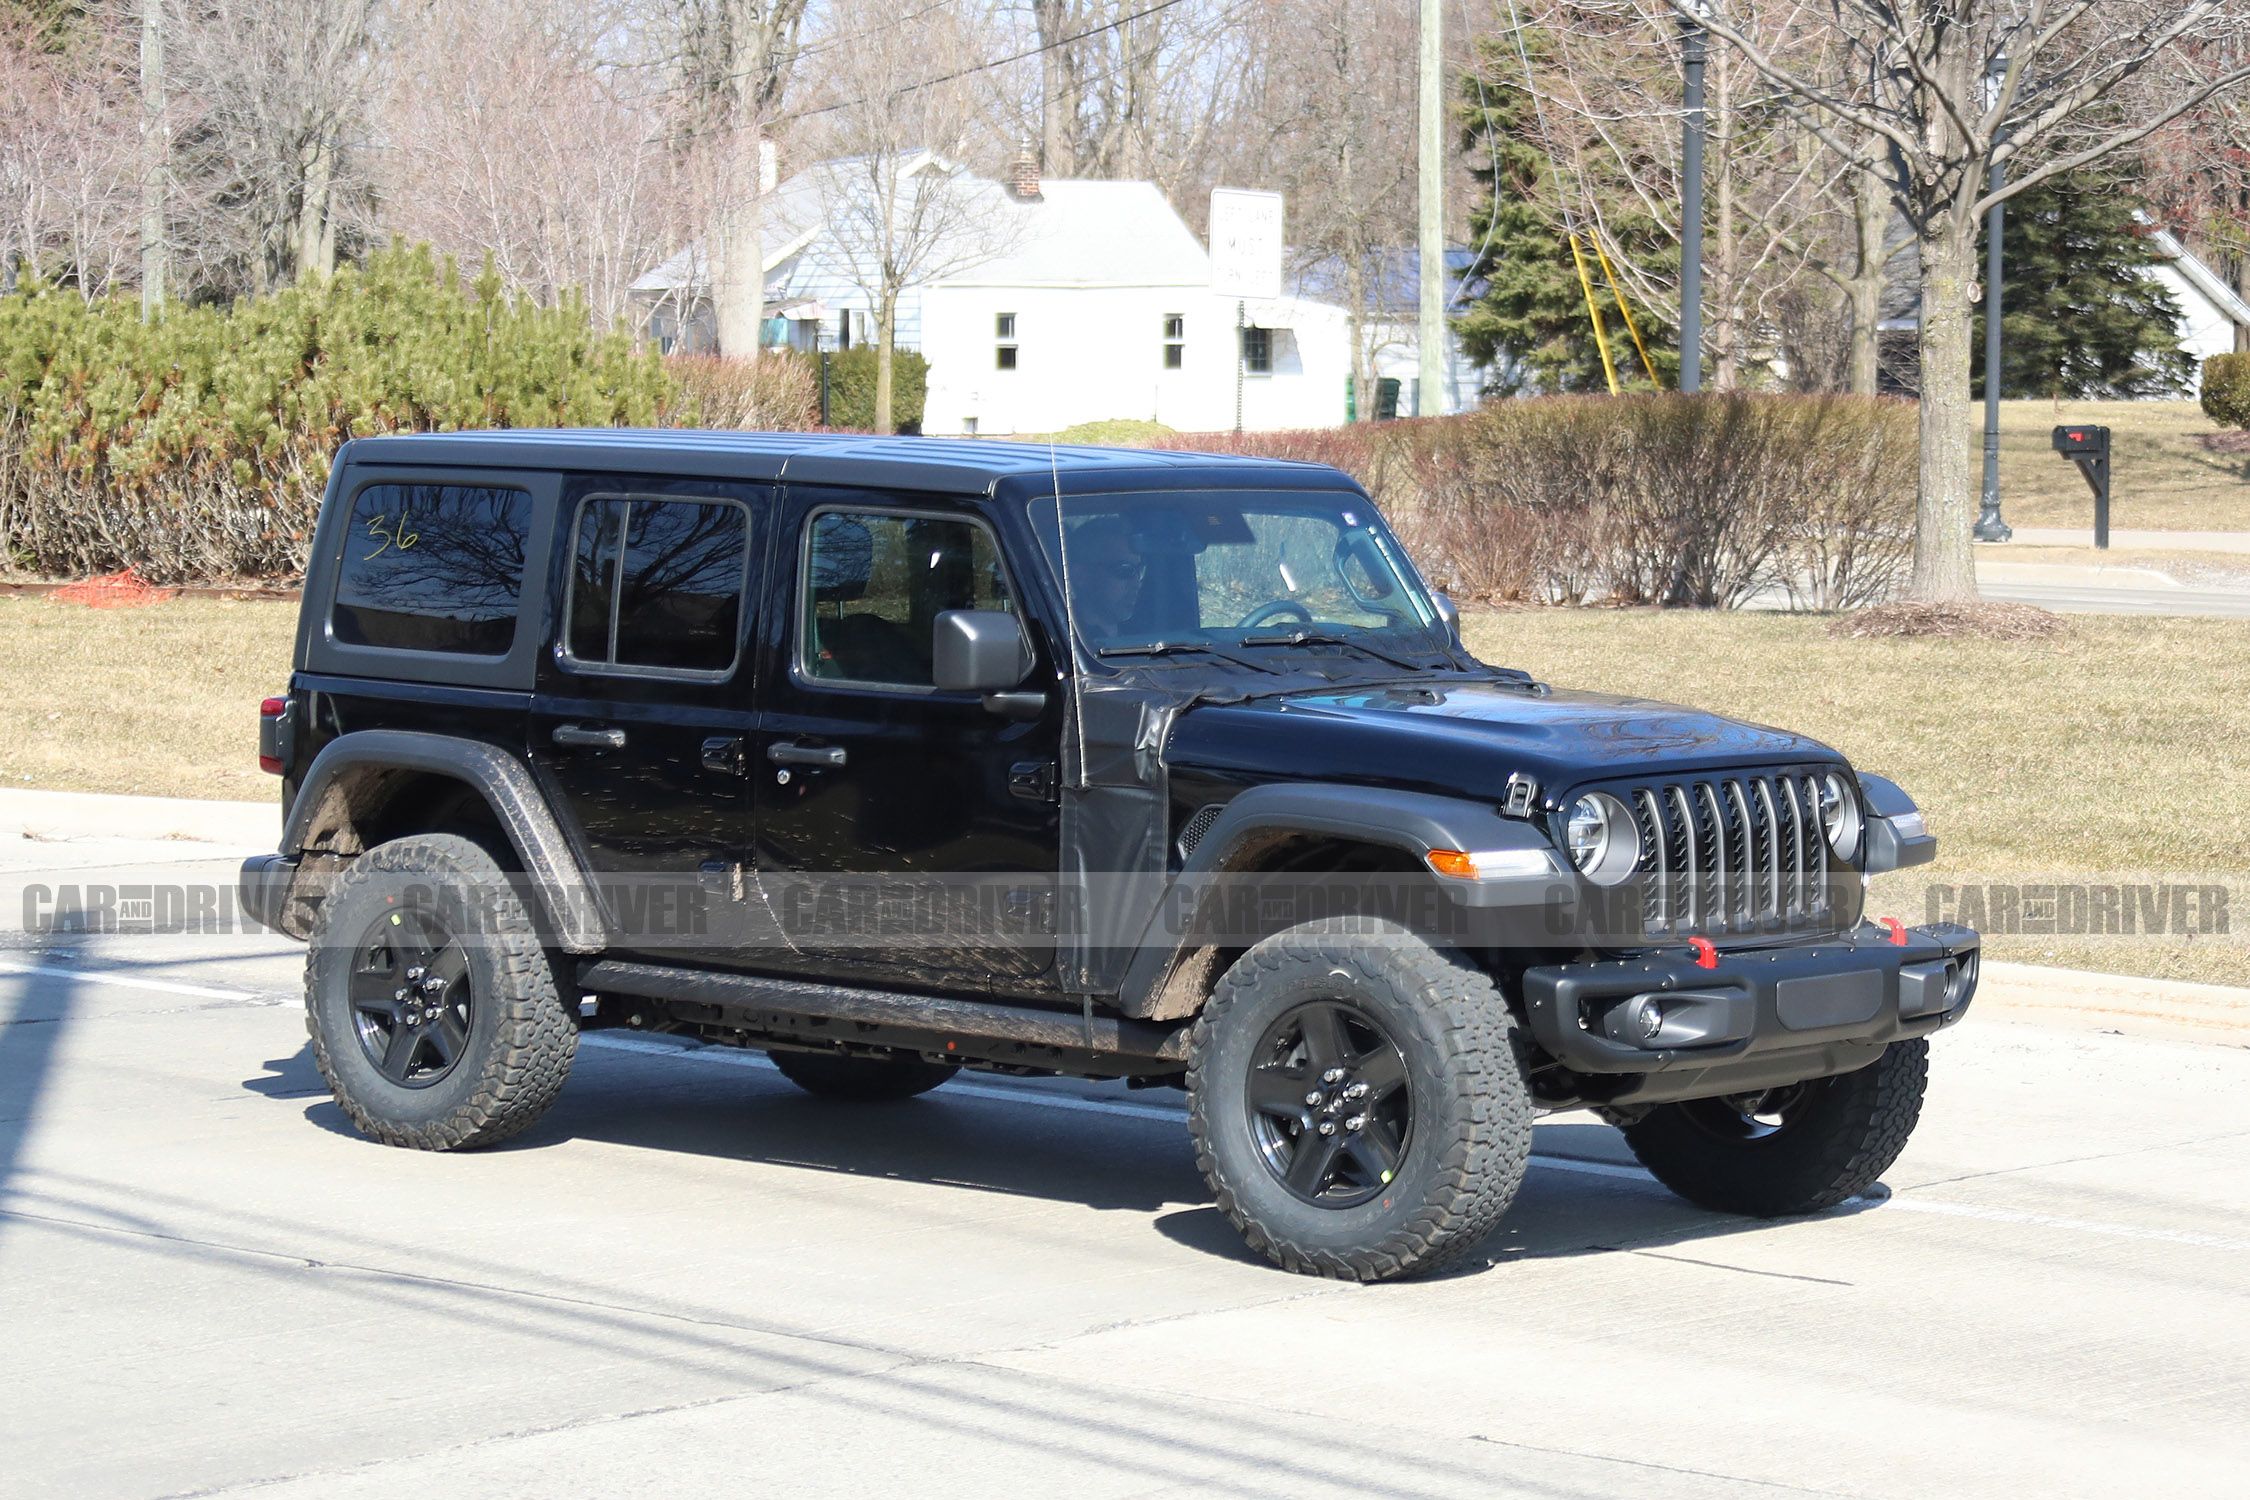 Jeep Wrangler Plug-In Hybrid – New Gas-Electric SUV Spied Testing